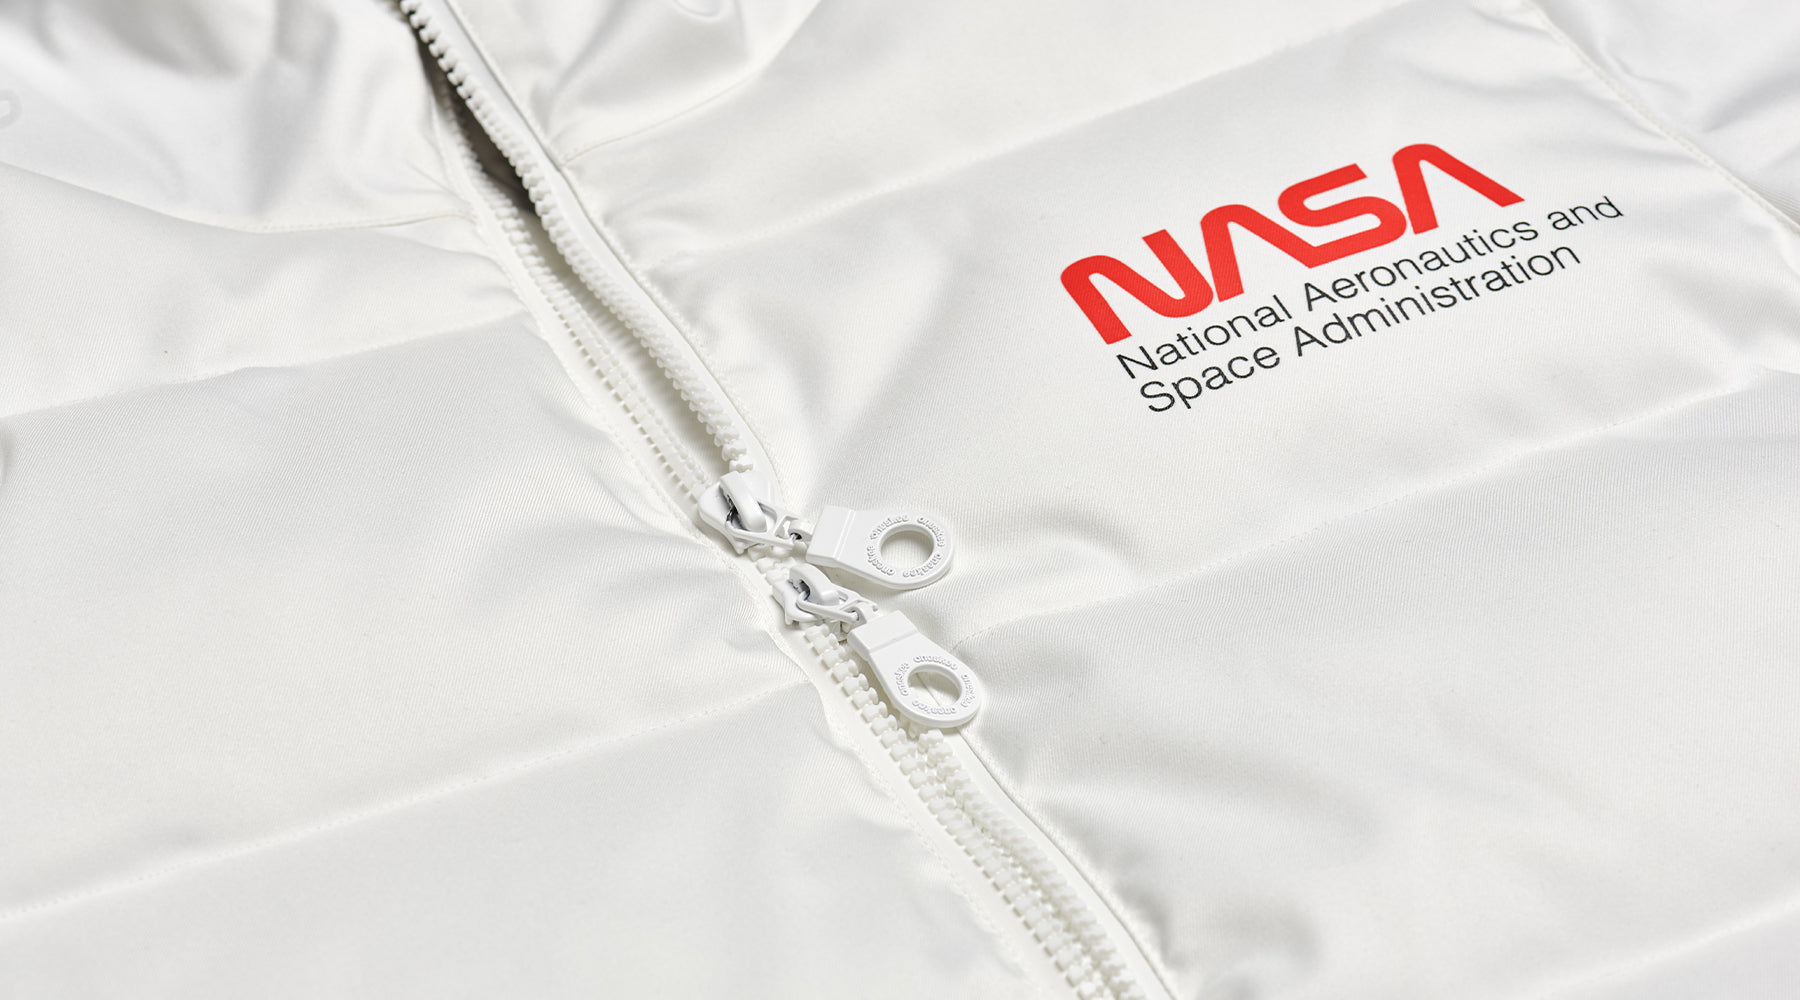 The story behind our NASA collection.